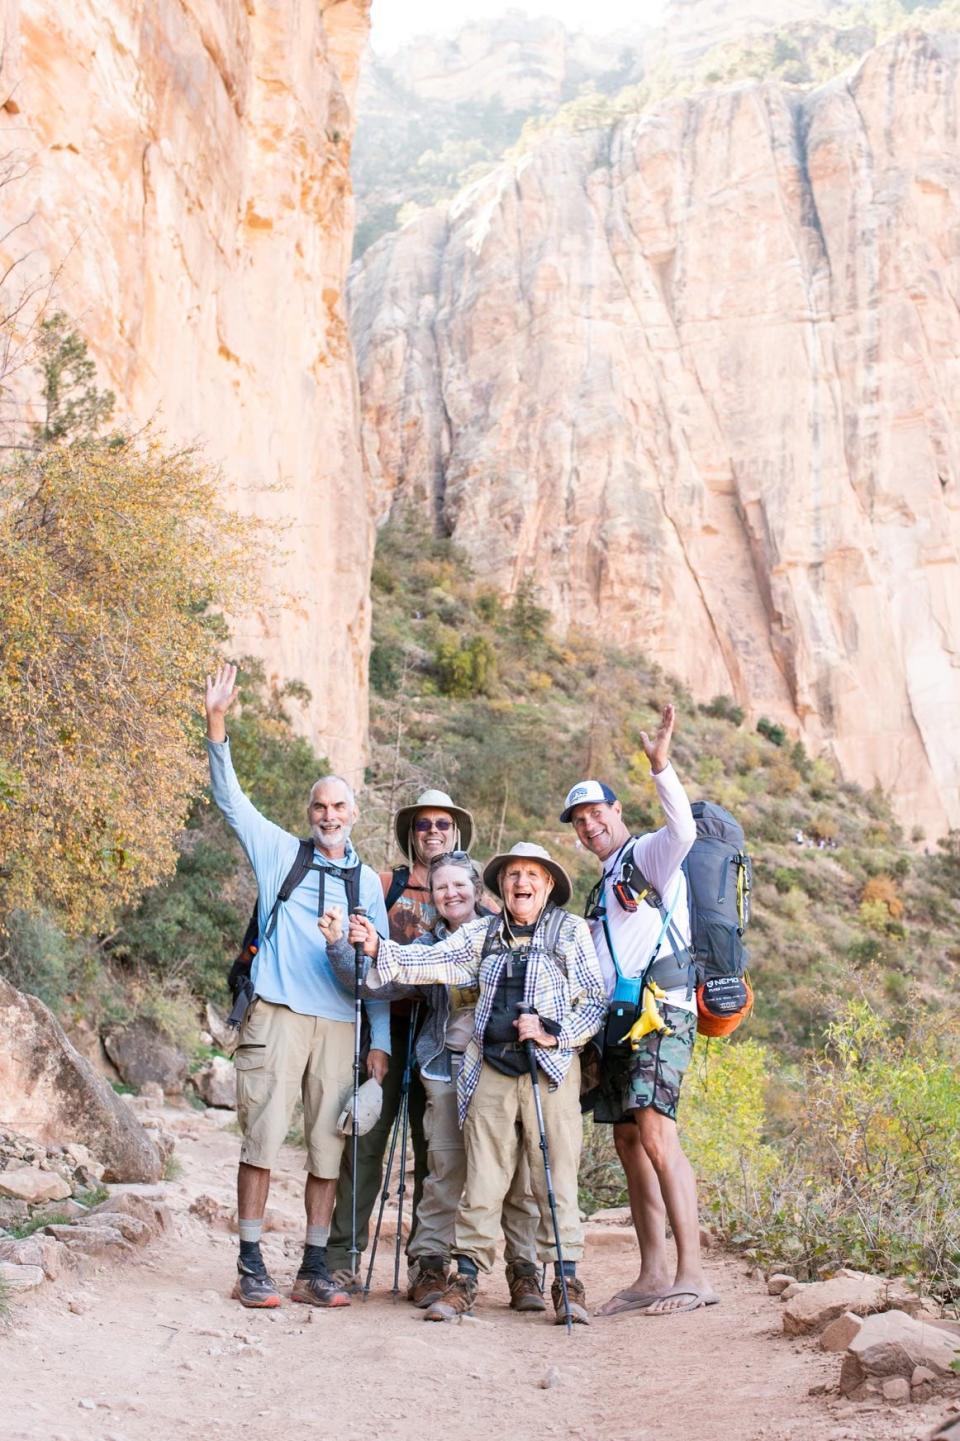 Alfredo Aliaga Burdio, 92, is pictured during his 24-mile rim-to-rim hike of the Grand Canyon on Oct.14 and 15, 2023, along with (from left to right) witness Peter Todd, son-in-law Jurgen Buchenau, daughter Anabel Aliaga-Buchenau, and witness Julian Coiner.